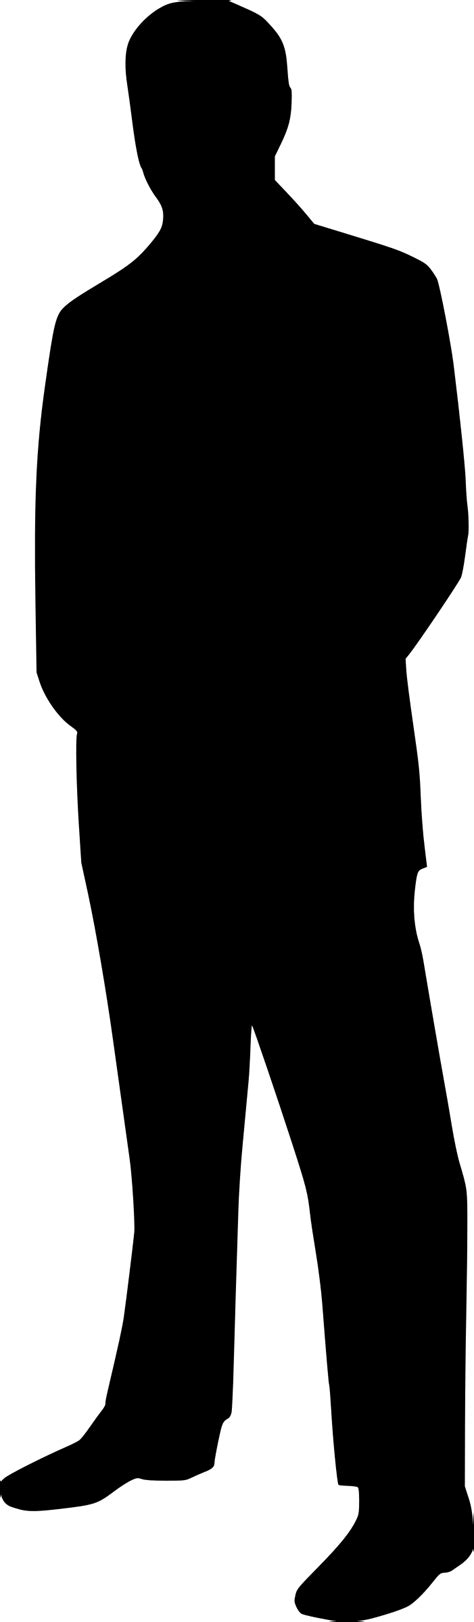 Clipart Man In Black Clipground